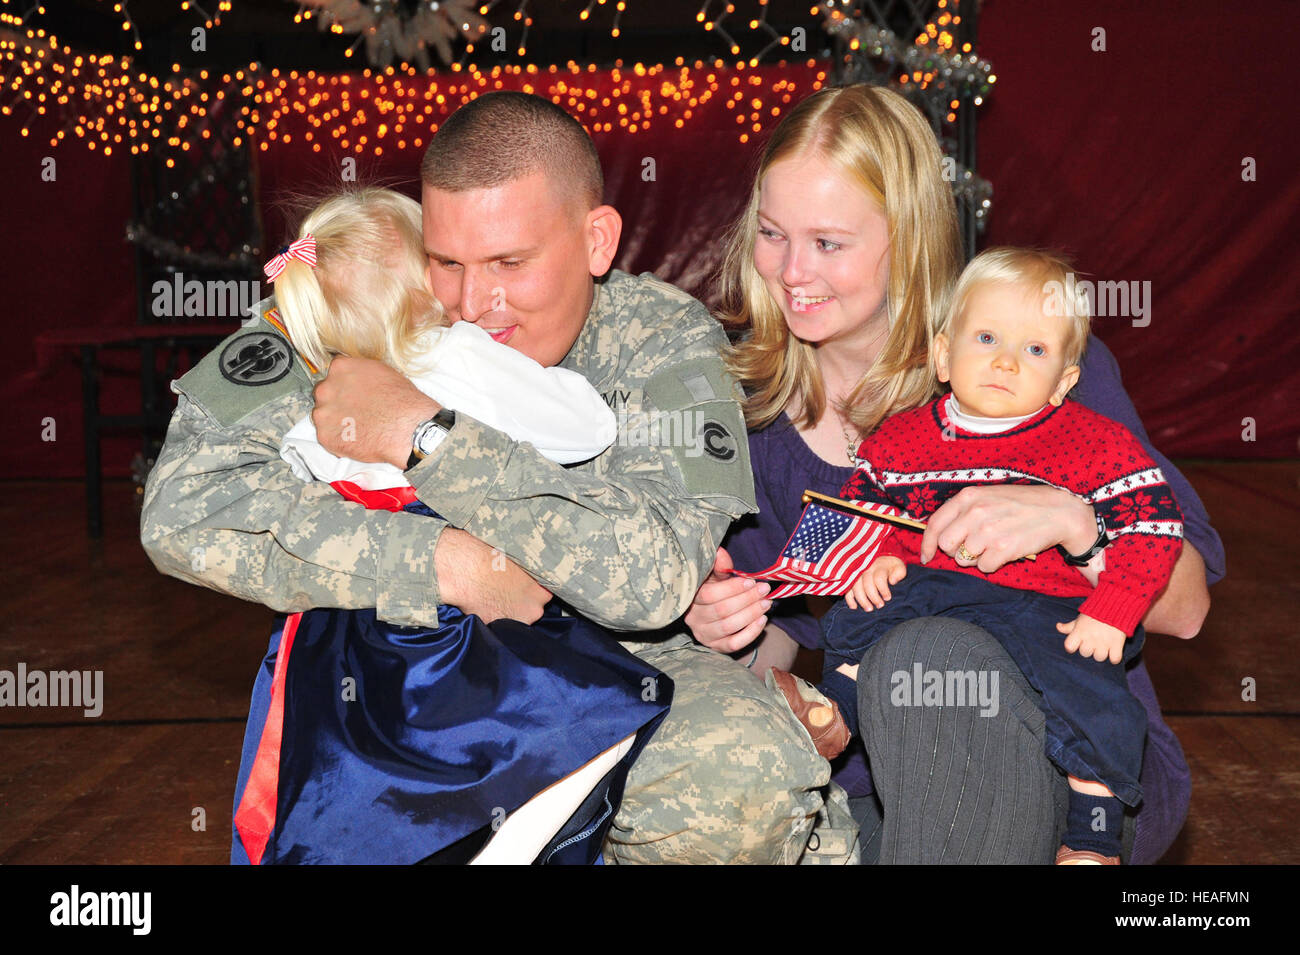 Colorado Army National Guard Sgt. Blake Olson greets his family at a small ceremony for the Soldiers of the 220th Military Police Company, Colorado Army National Guard, at the Fort Carson Events Center in Colorado Springs, Colo., Dec. 17. The Soldiers are returning from their deployment in support of Operation Iraqi Freedom. A few Soldiers are seeing their families for the first time since leaving for pre-deployment training last January. While deployed, the 220th MP Company was assigned to Task Force 134 at Camp Cropper in Baghdad, where Soldiers were responsible for detainee operations; ensu Stock Photo